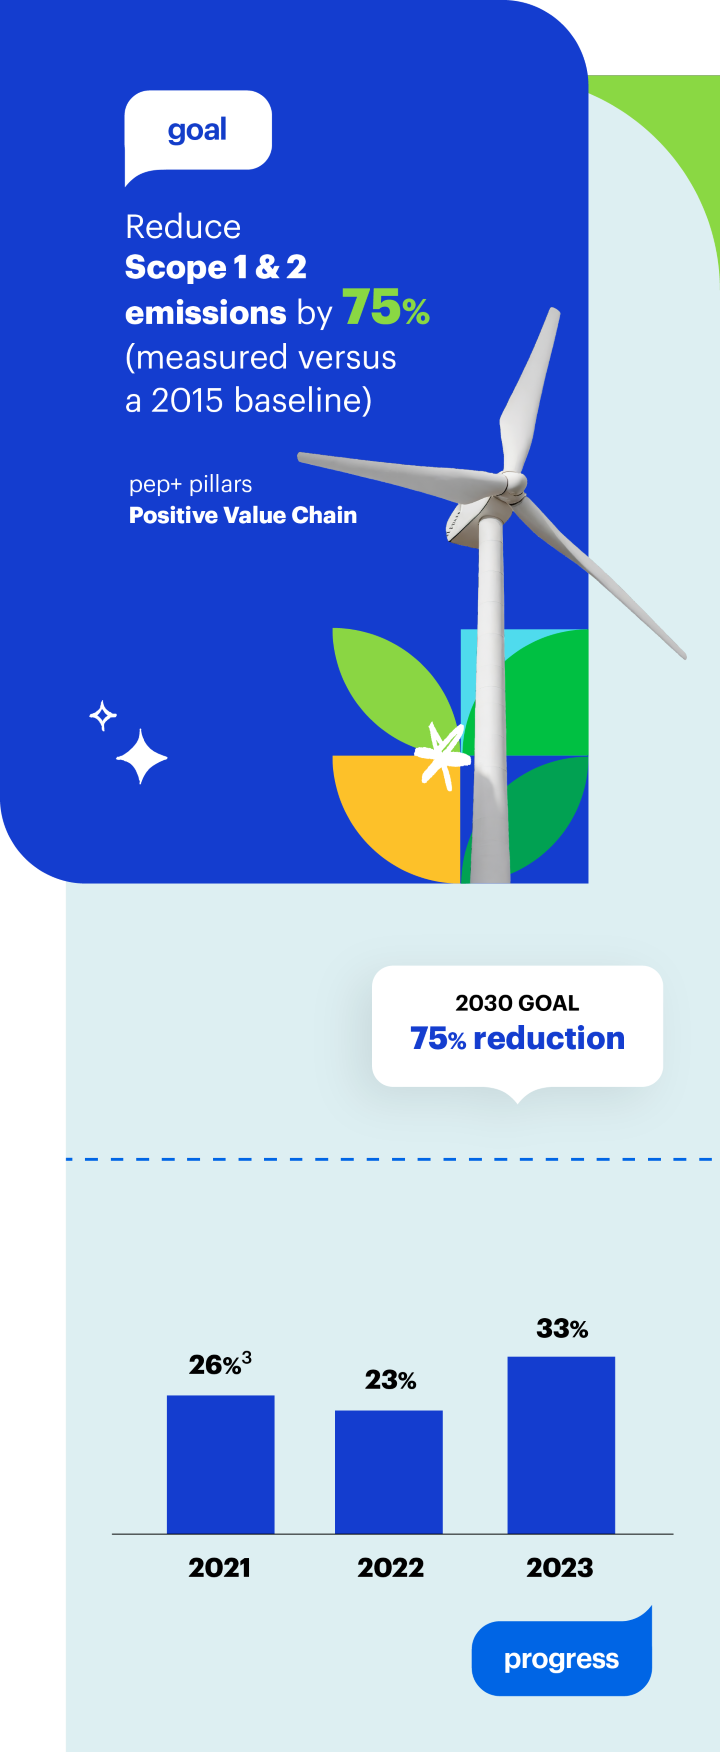 Goal: Reduce total Scope 1 & 2 emissions by 75% by 2030